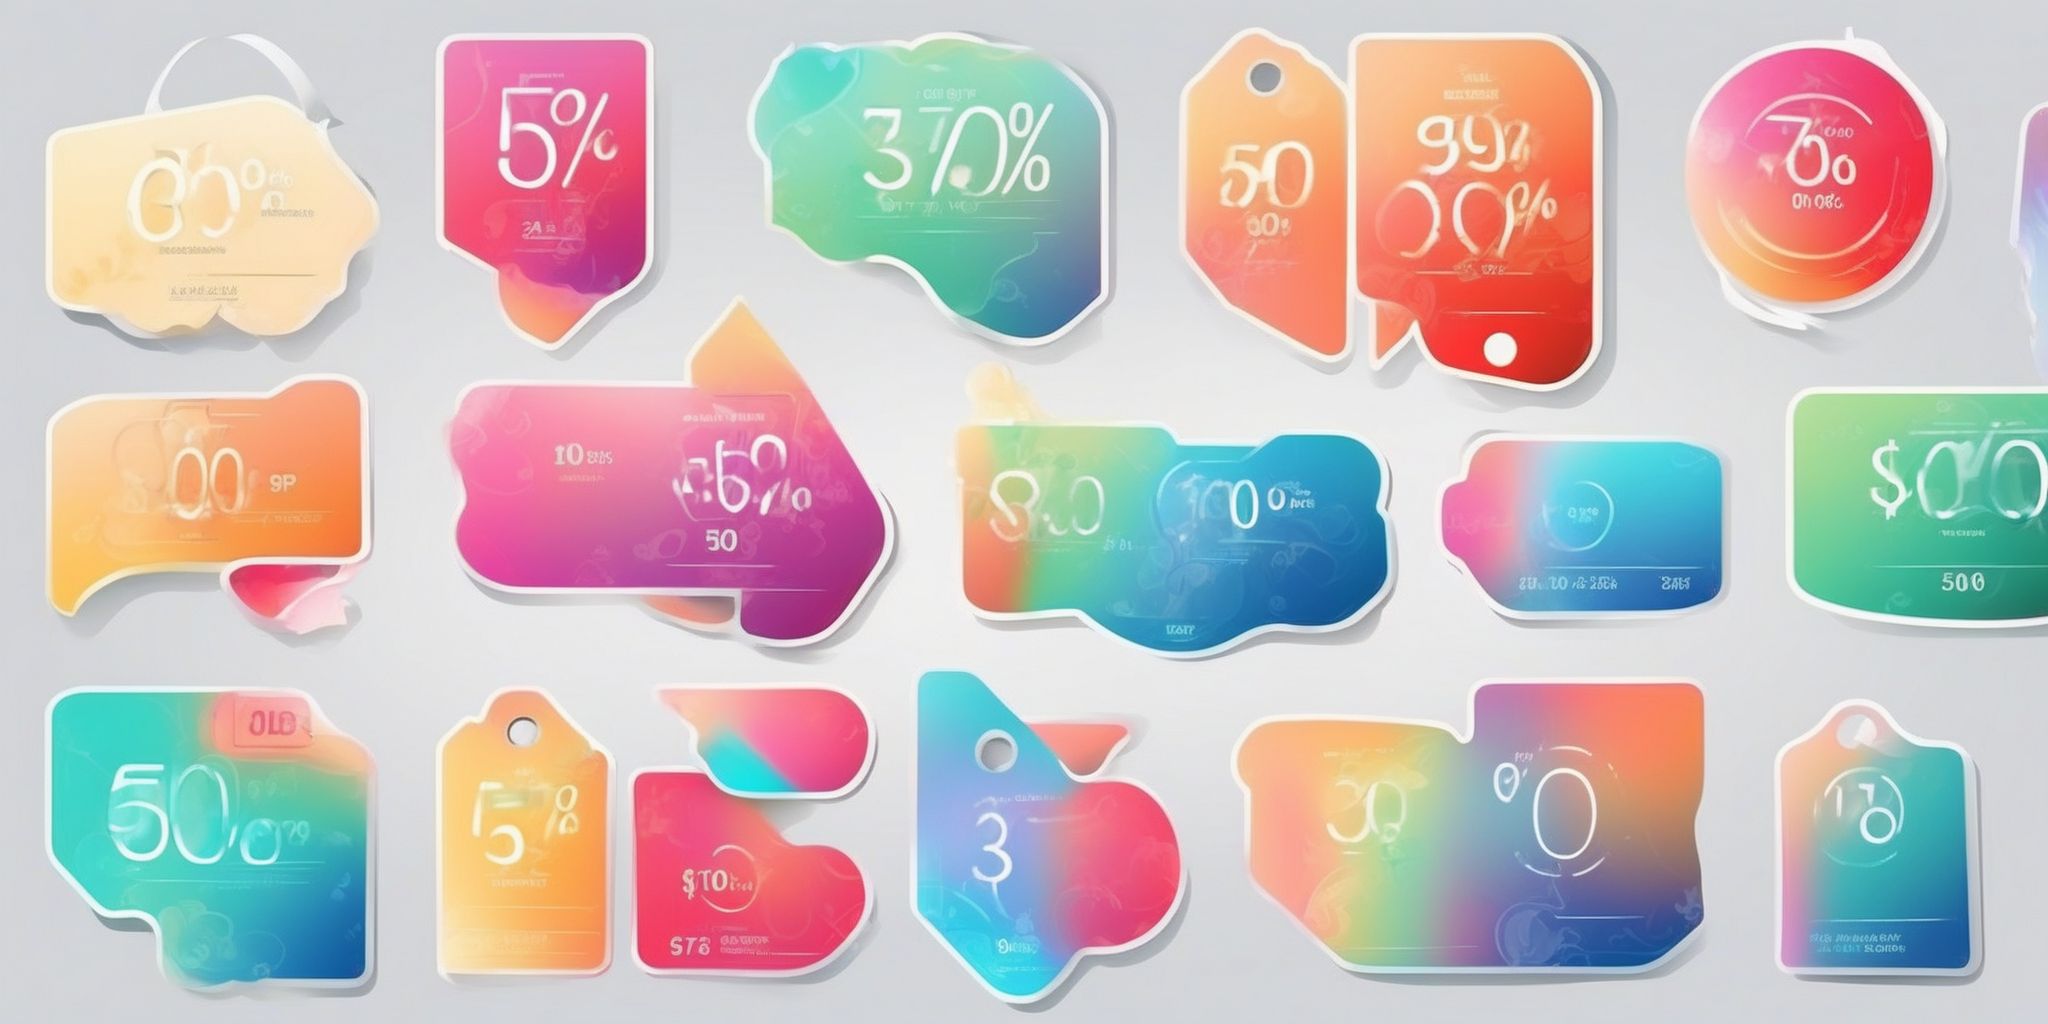 Price tag in illustration style with gradients and white background